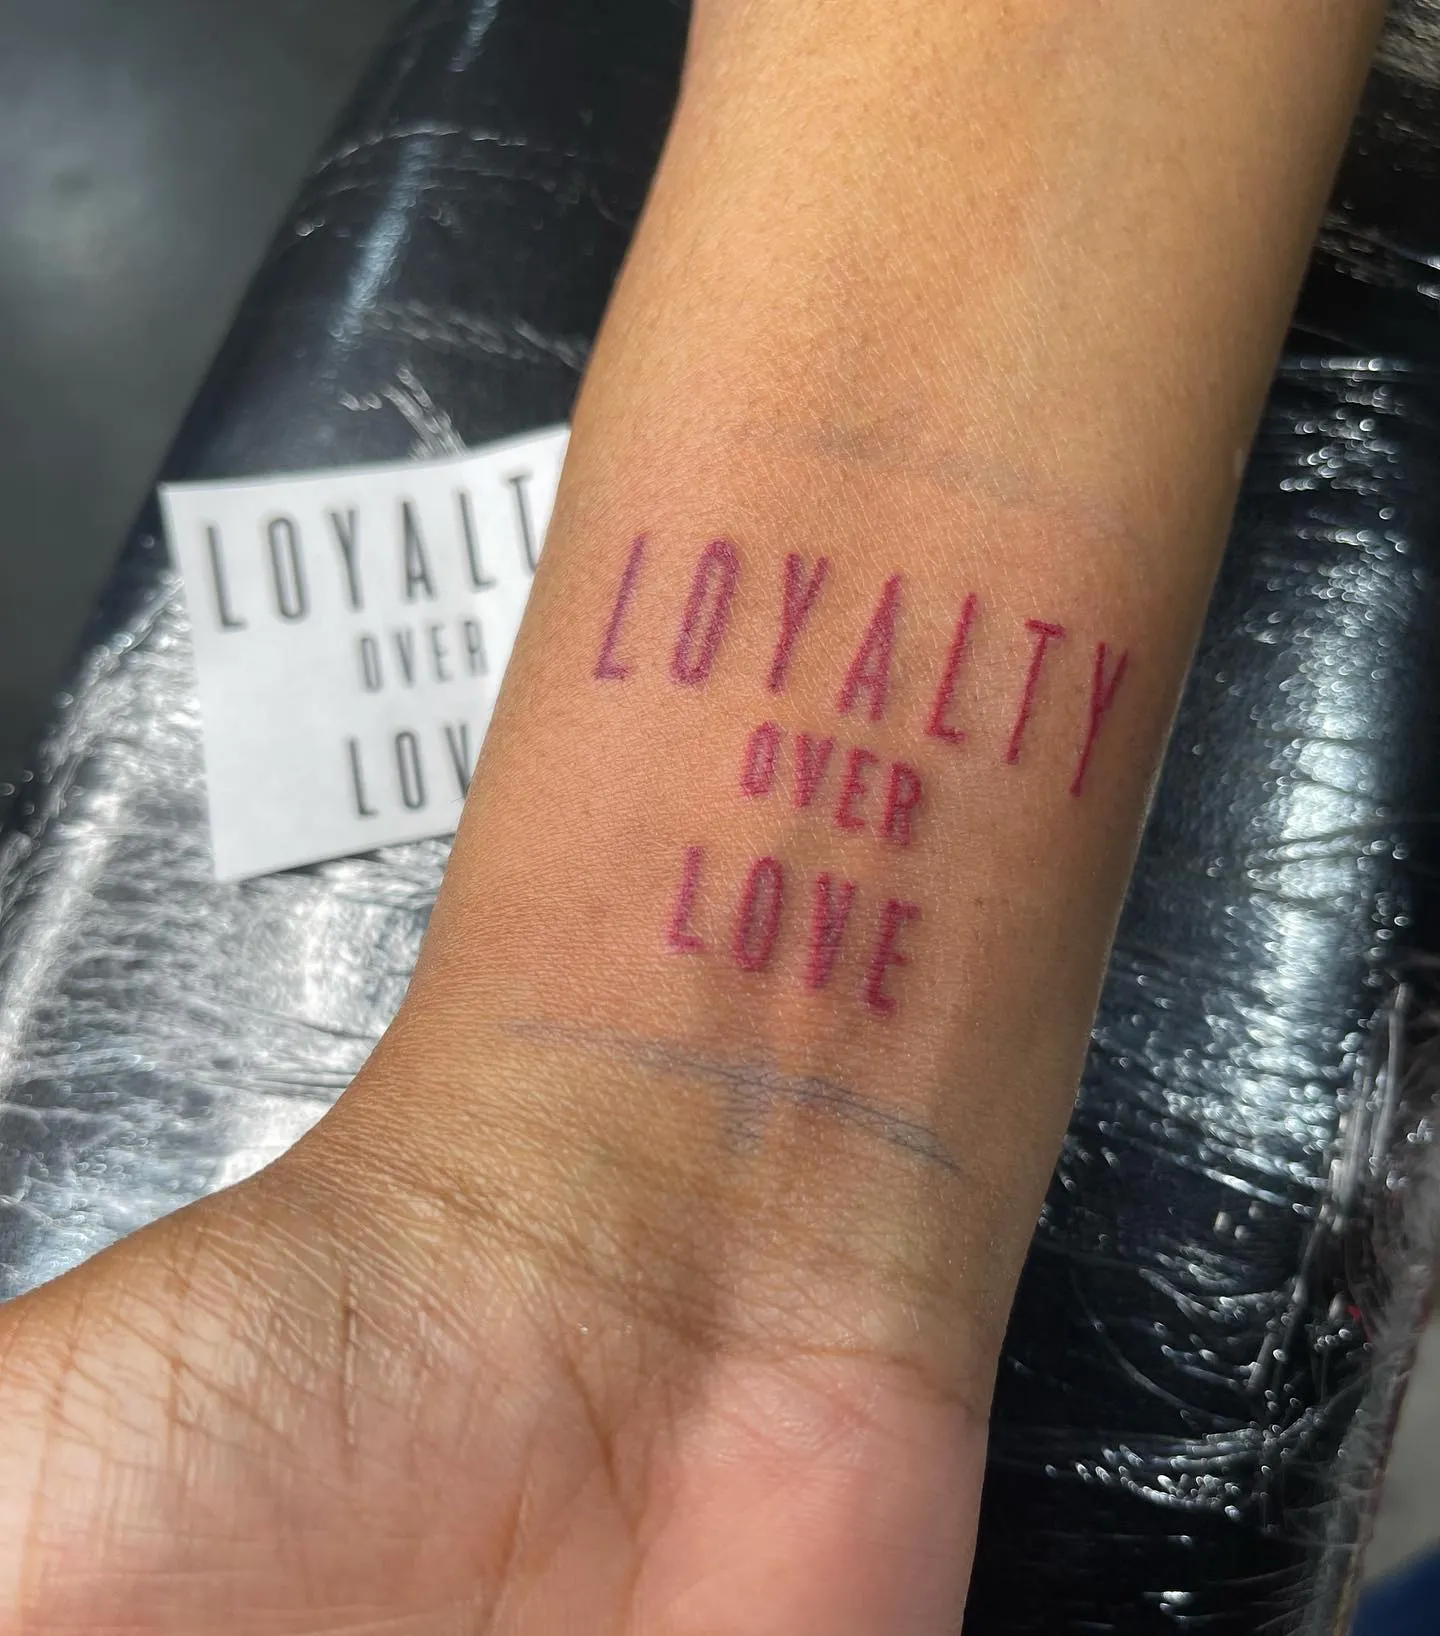 Loyalty Over Love in Red Ink on Forearm